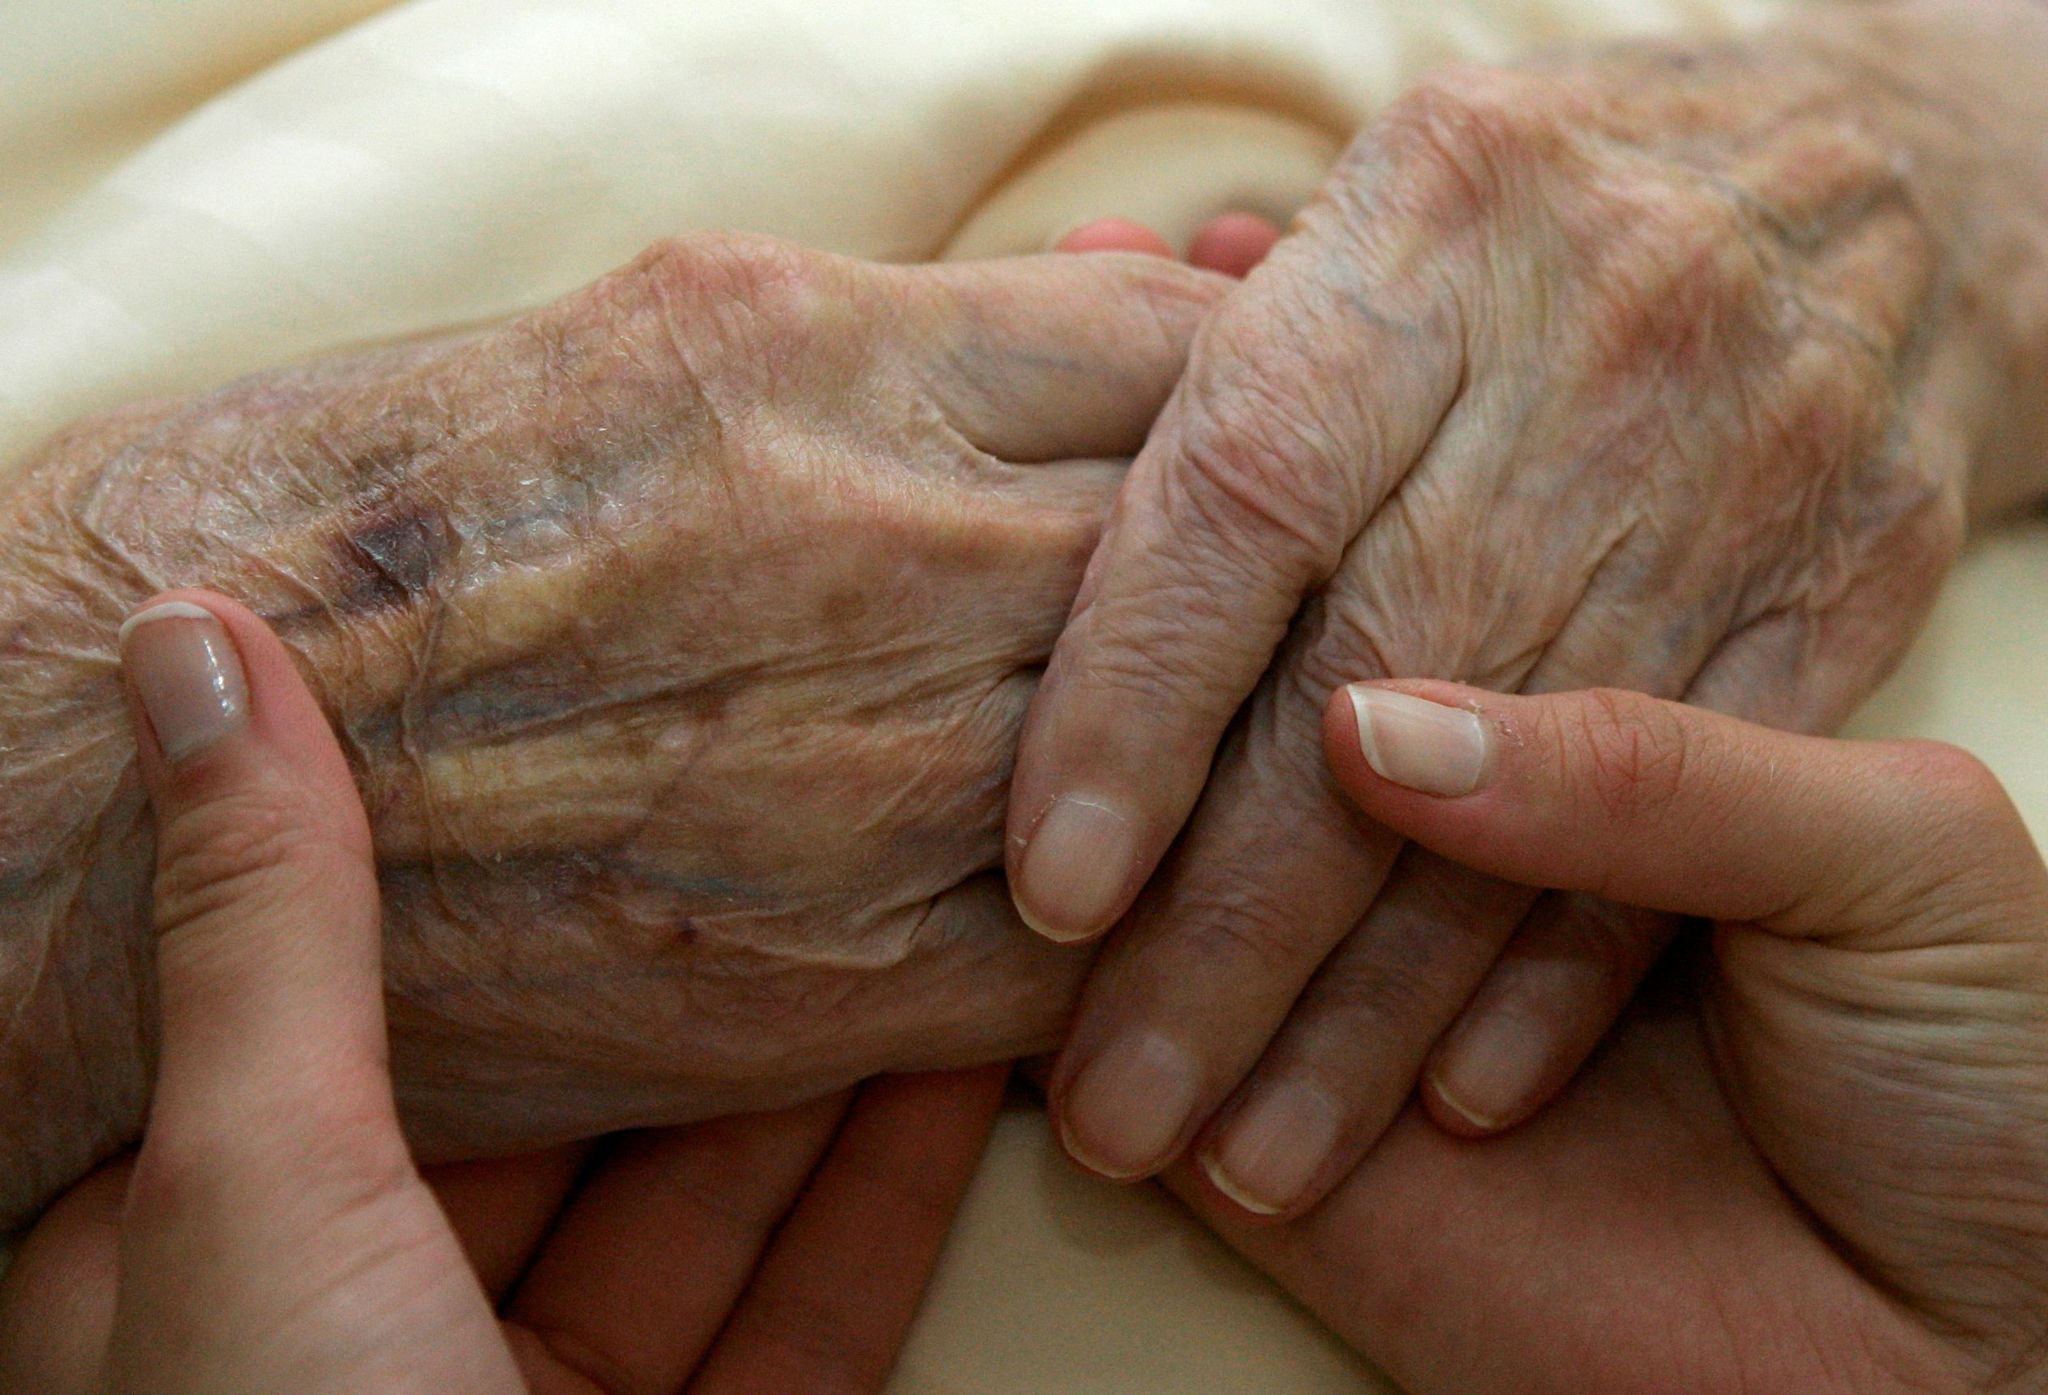 A close up images of a young person holding the hands of an elderly person.